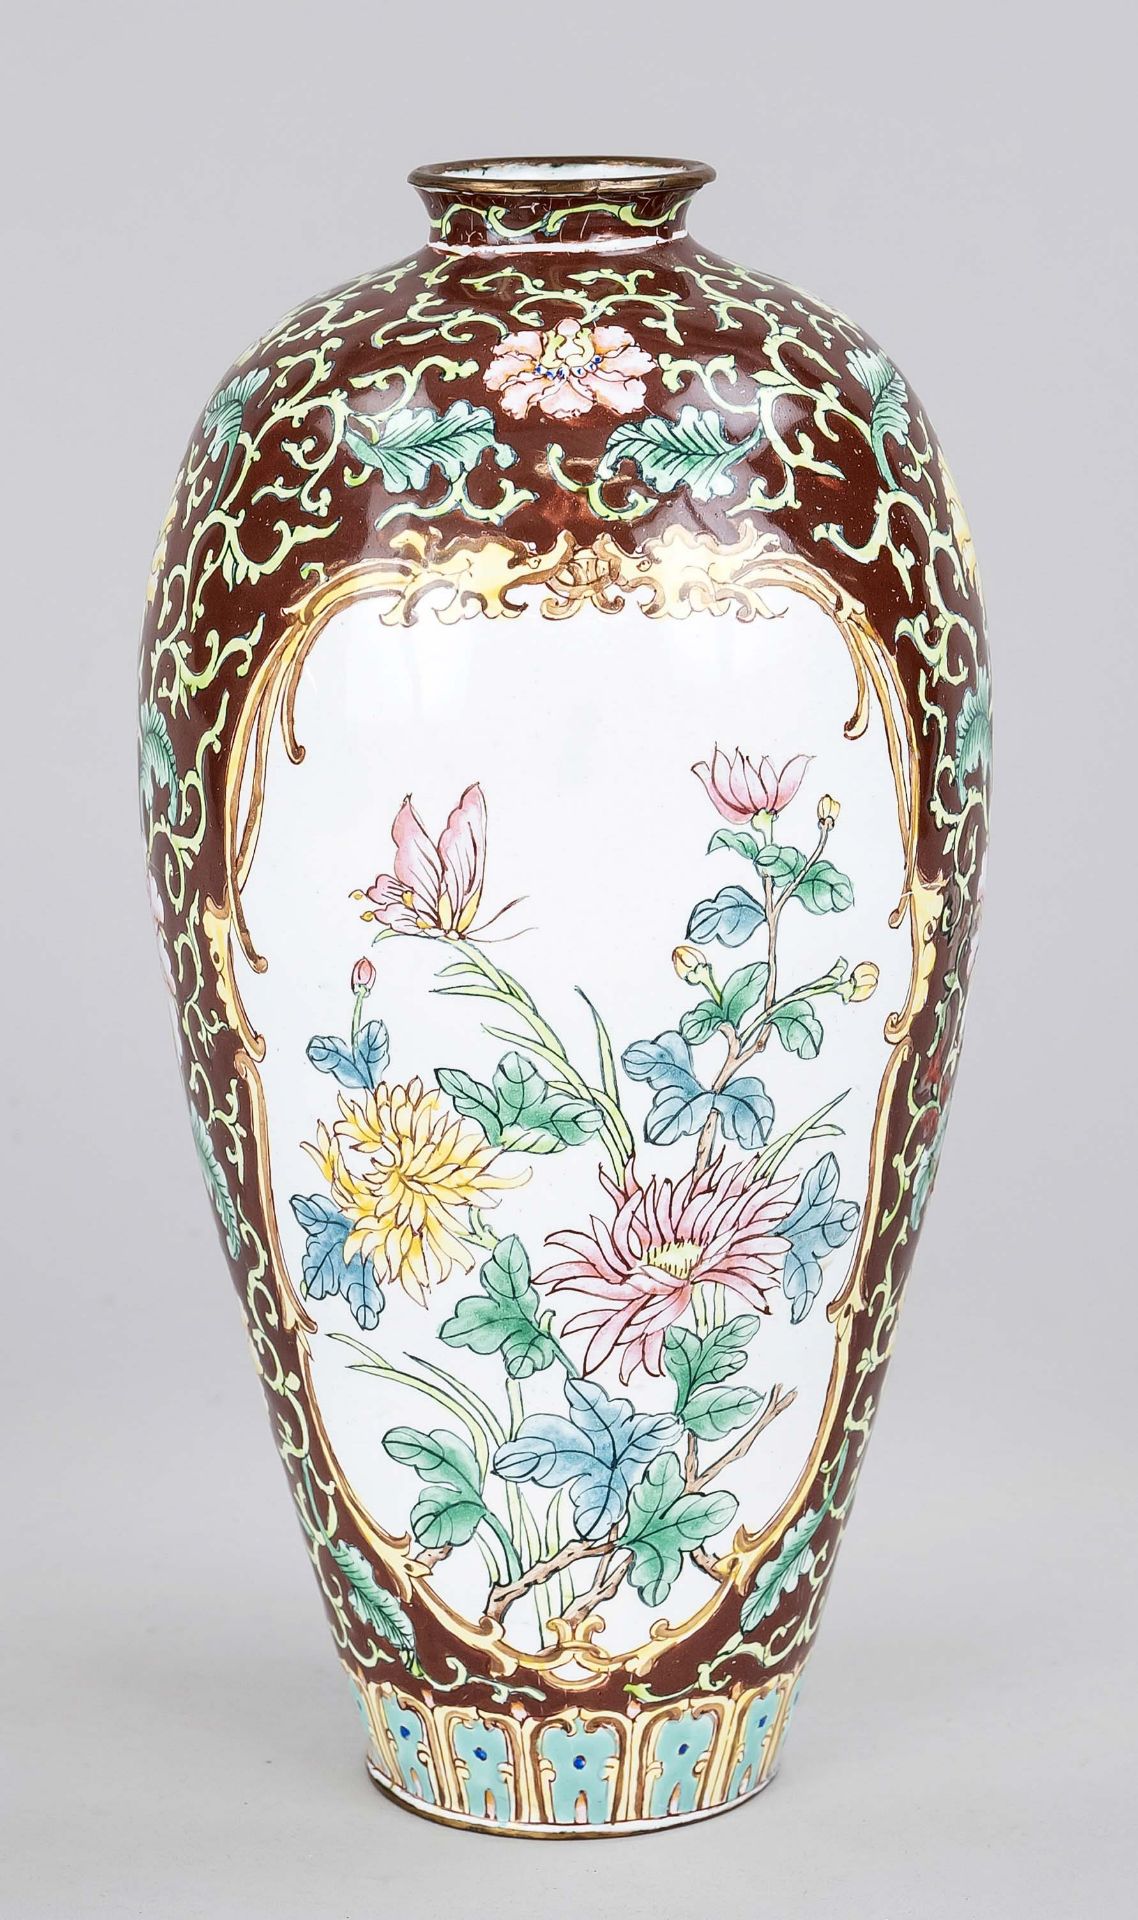 Vase Canton enamel, probably South China 18th/19th century, brass body with polychrome enamel - Image 2 of 2